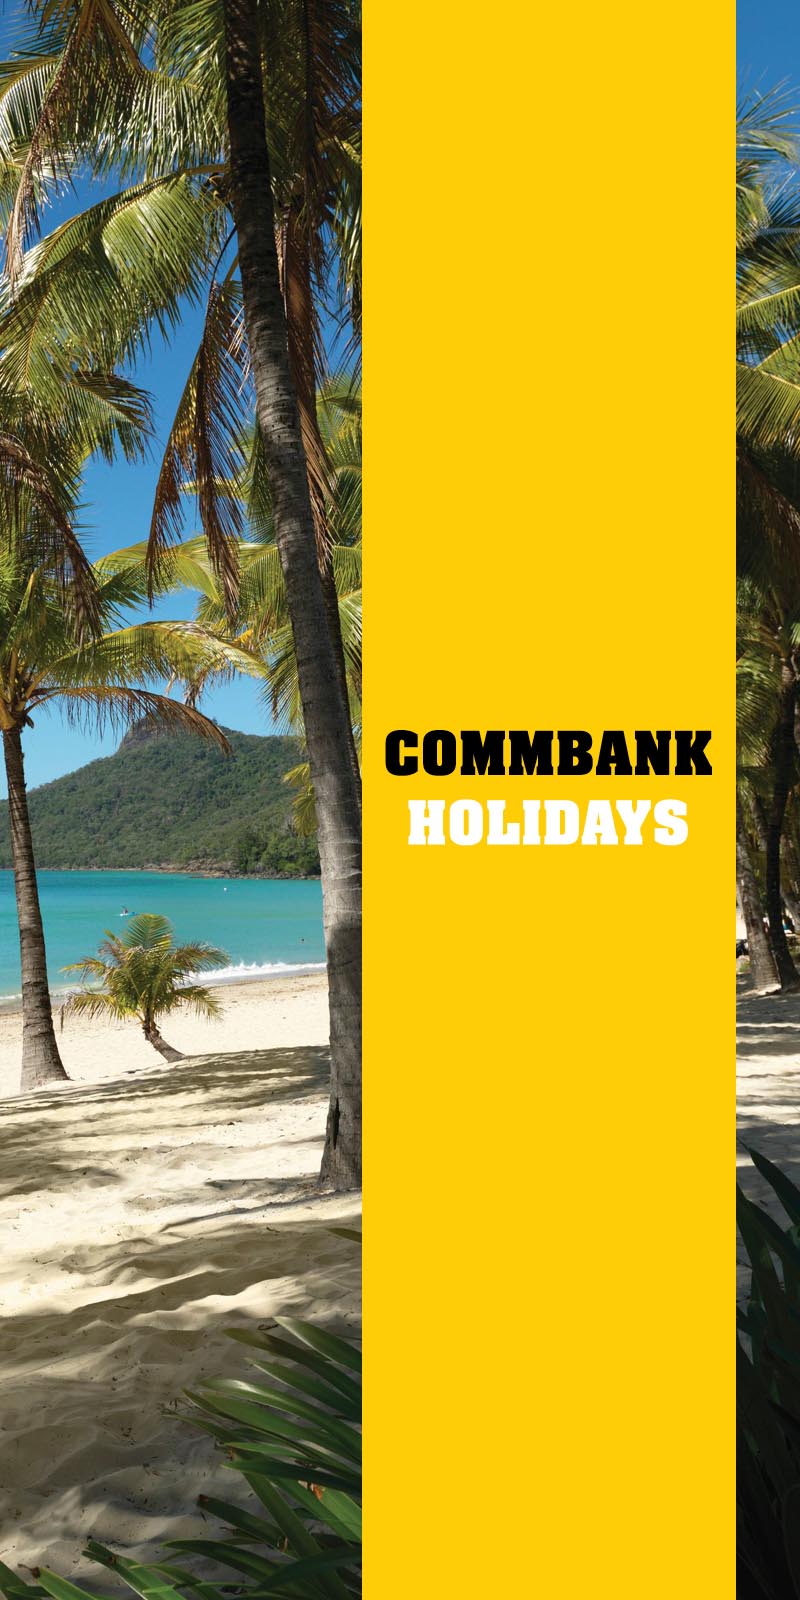 CommBank Holidays poster design by Think Creative Agency